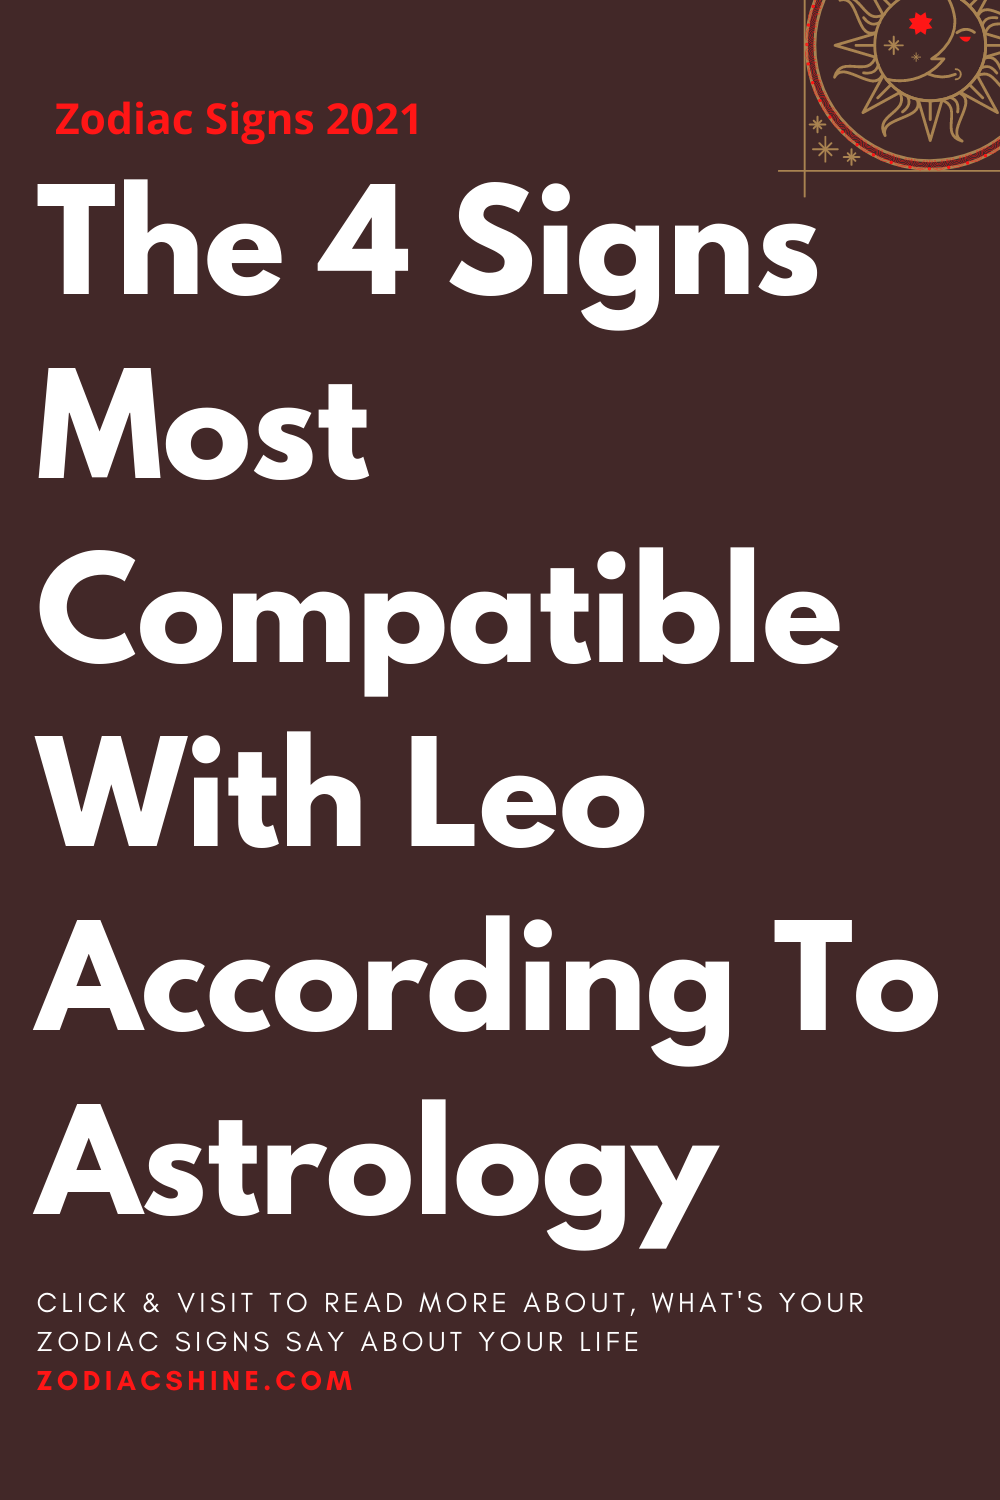 The 4 Signs Most Compatible With Leo According To Astrology